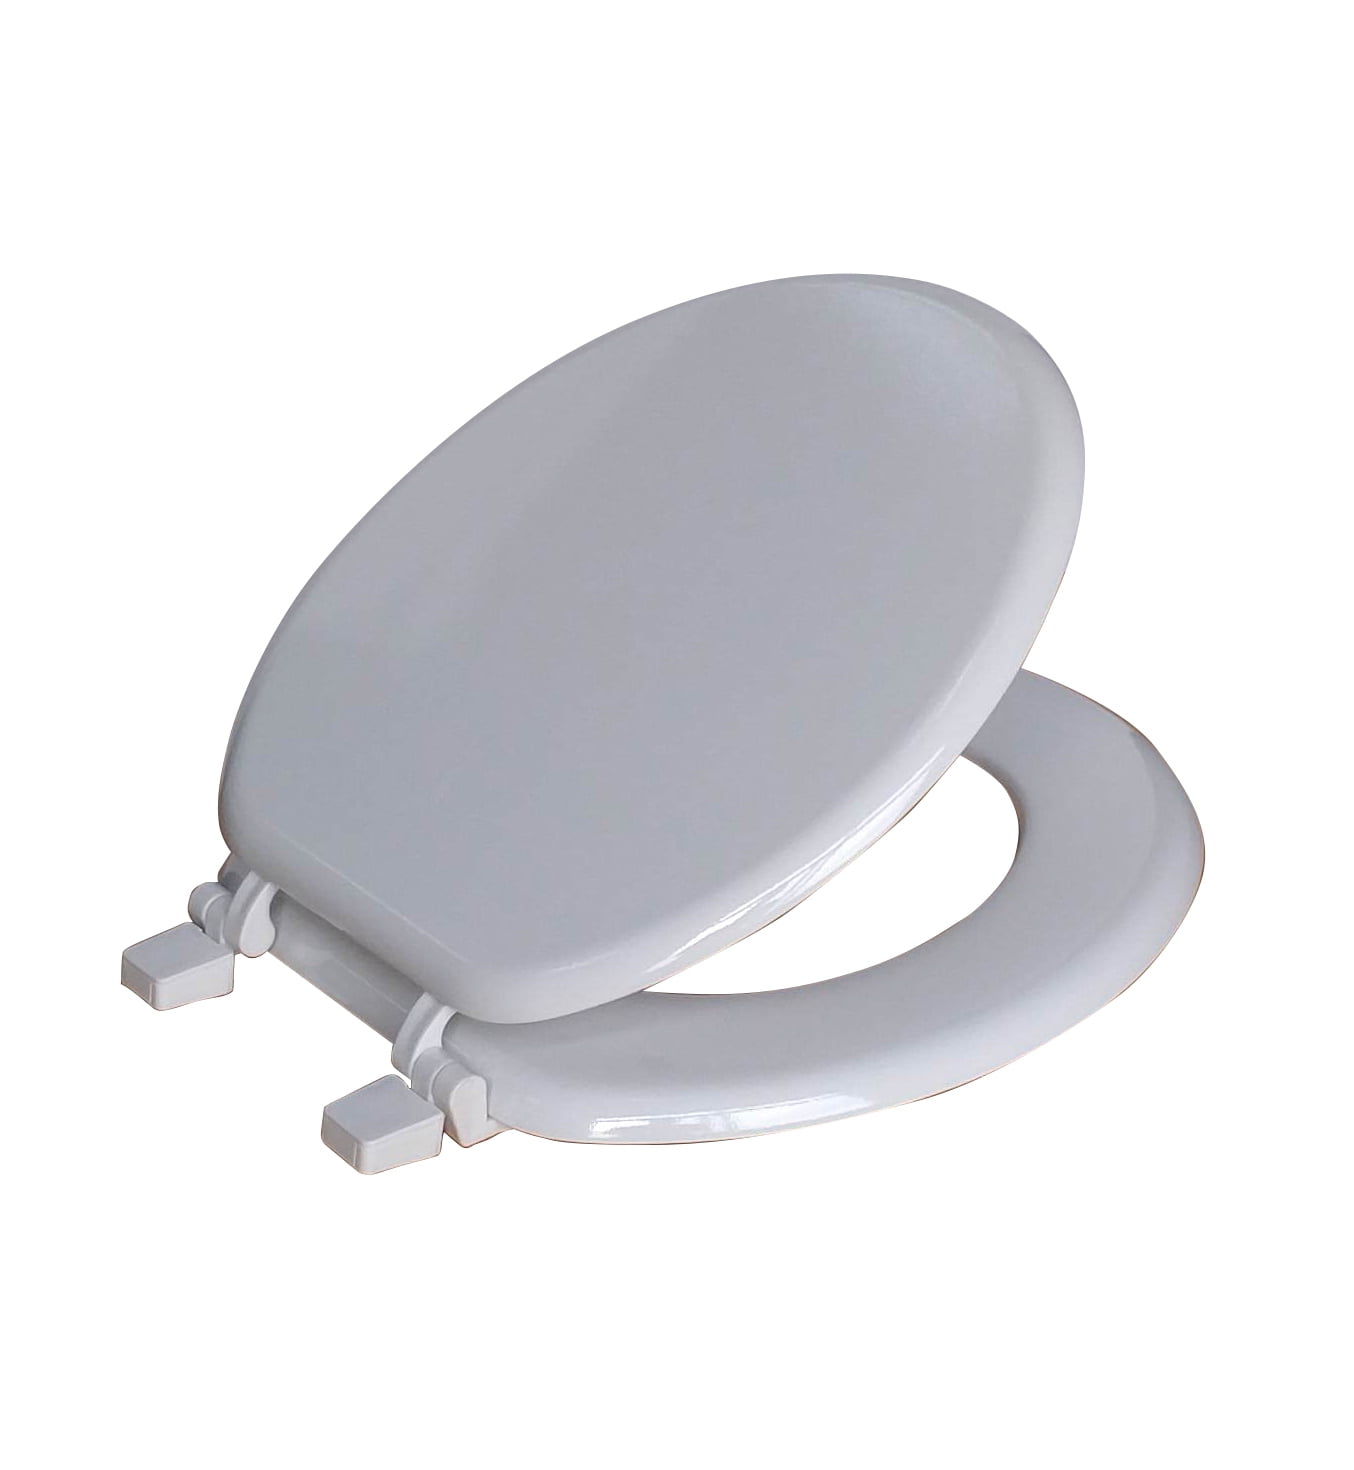 NEW! Project Source Durable White Wood High-Gloss Finish Round Toilet Seat 